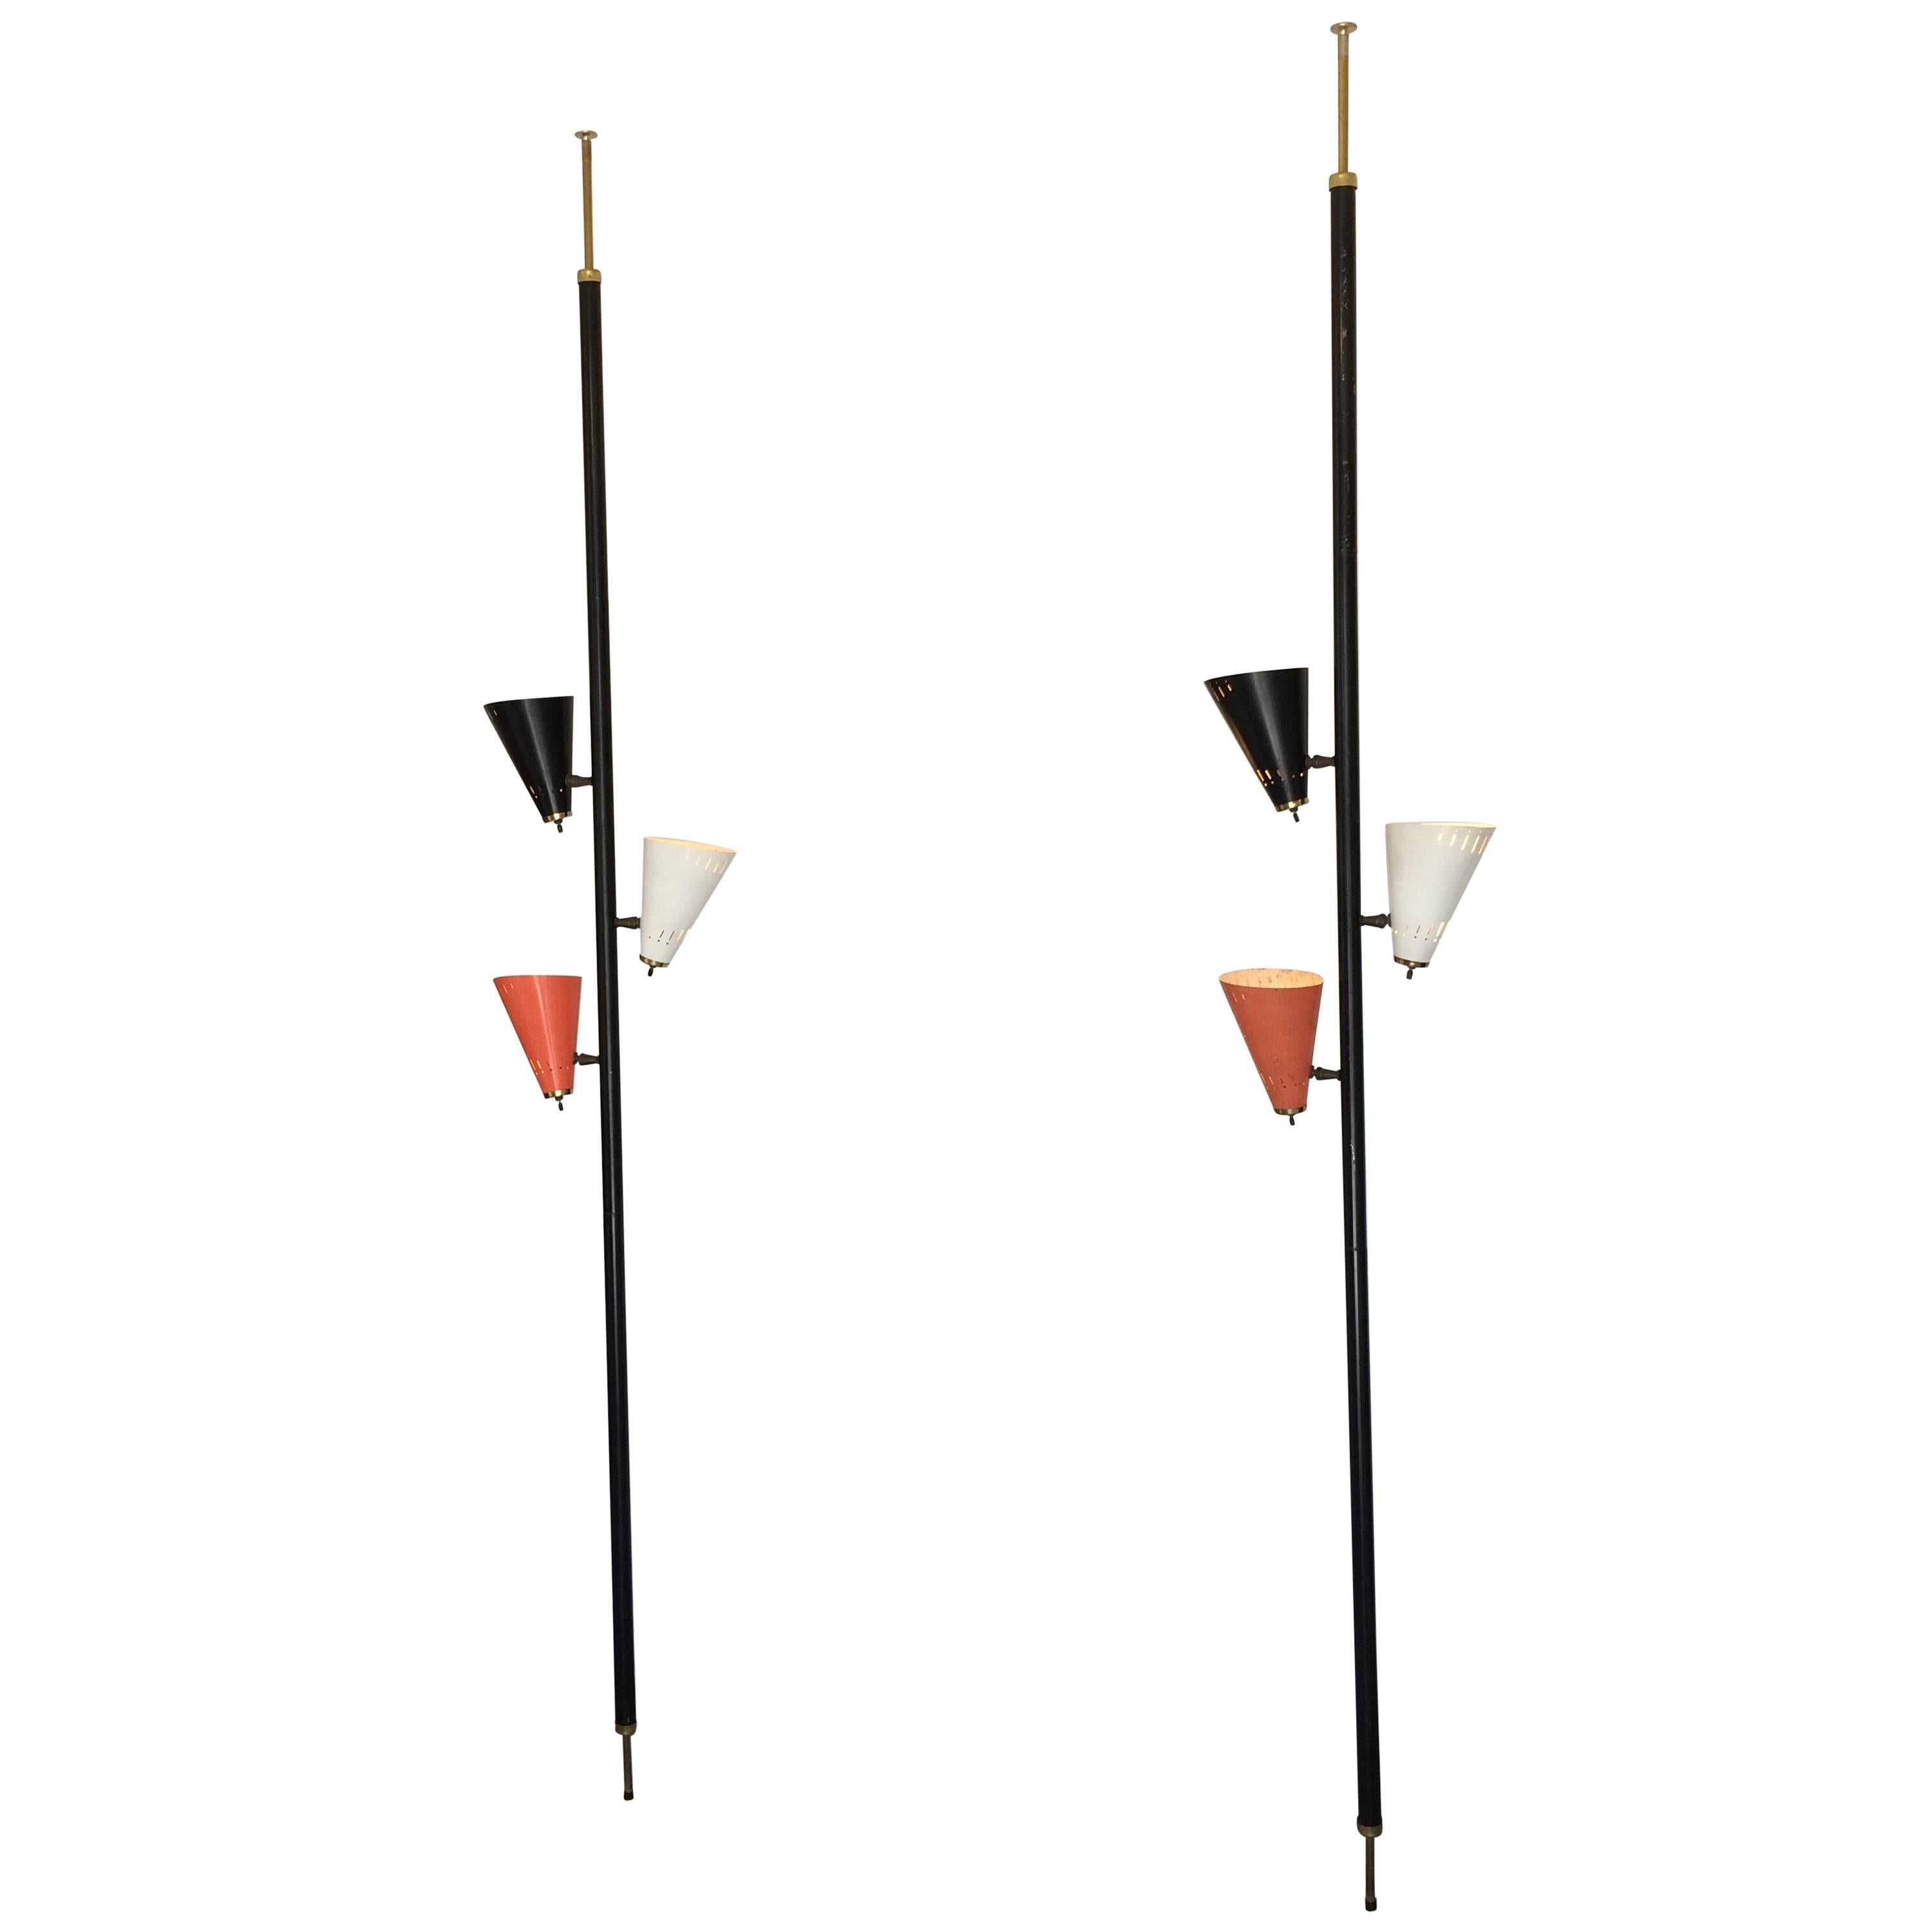 Pair of Mid-Century Modern Pole Tension Floor Lamps, USA, 1950s